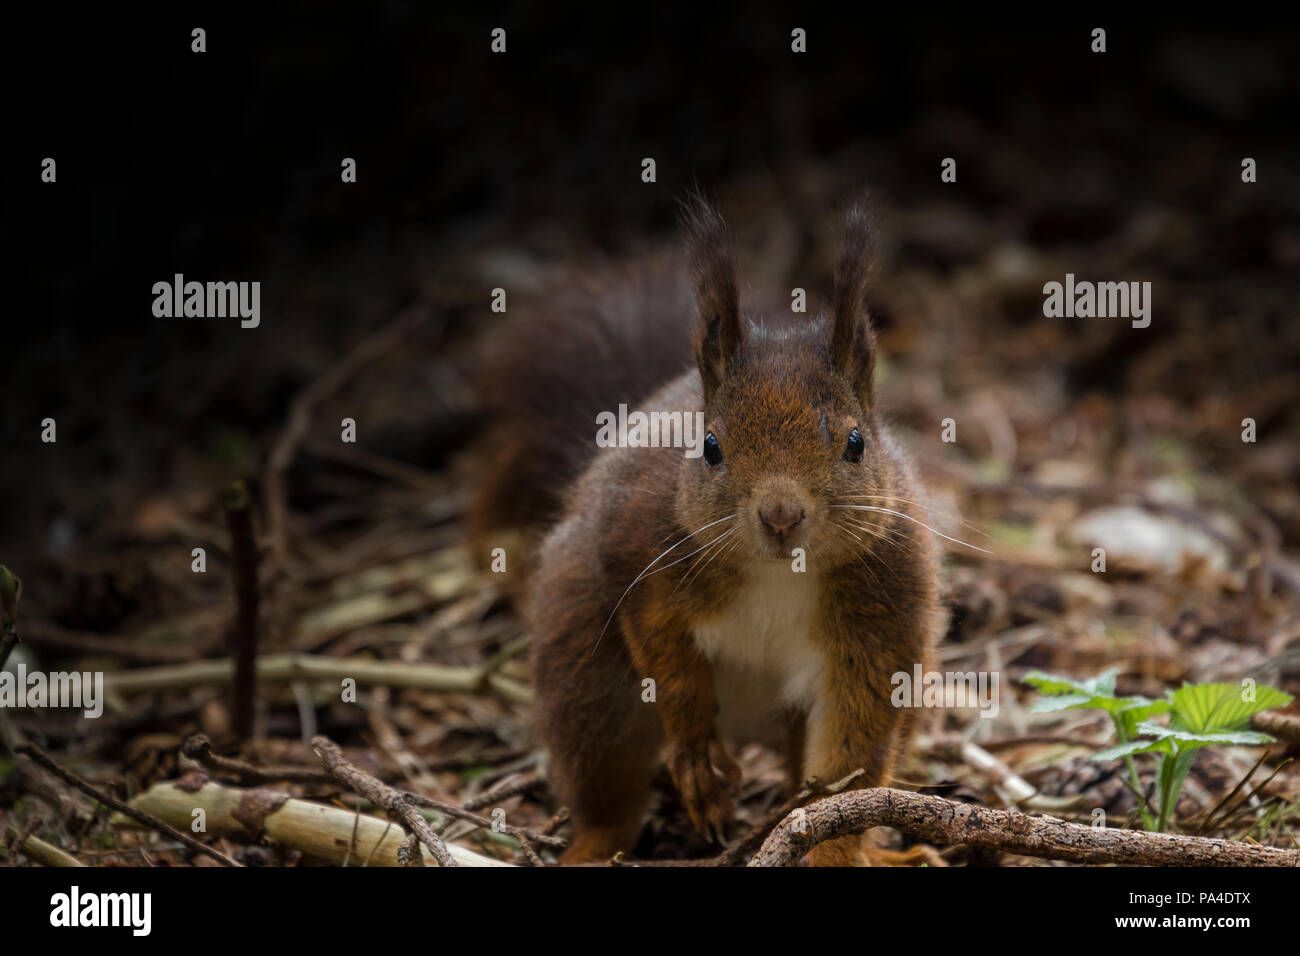 Red Squirrel Scavenging, Formby UK - Endangered Species Stock Photo